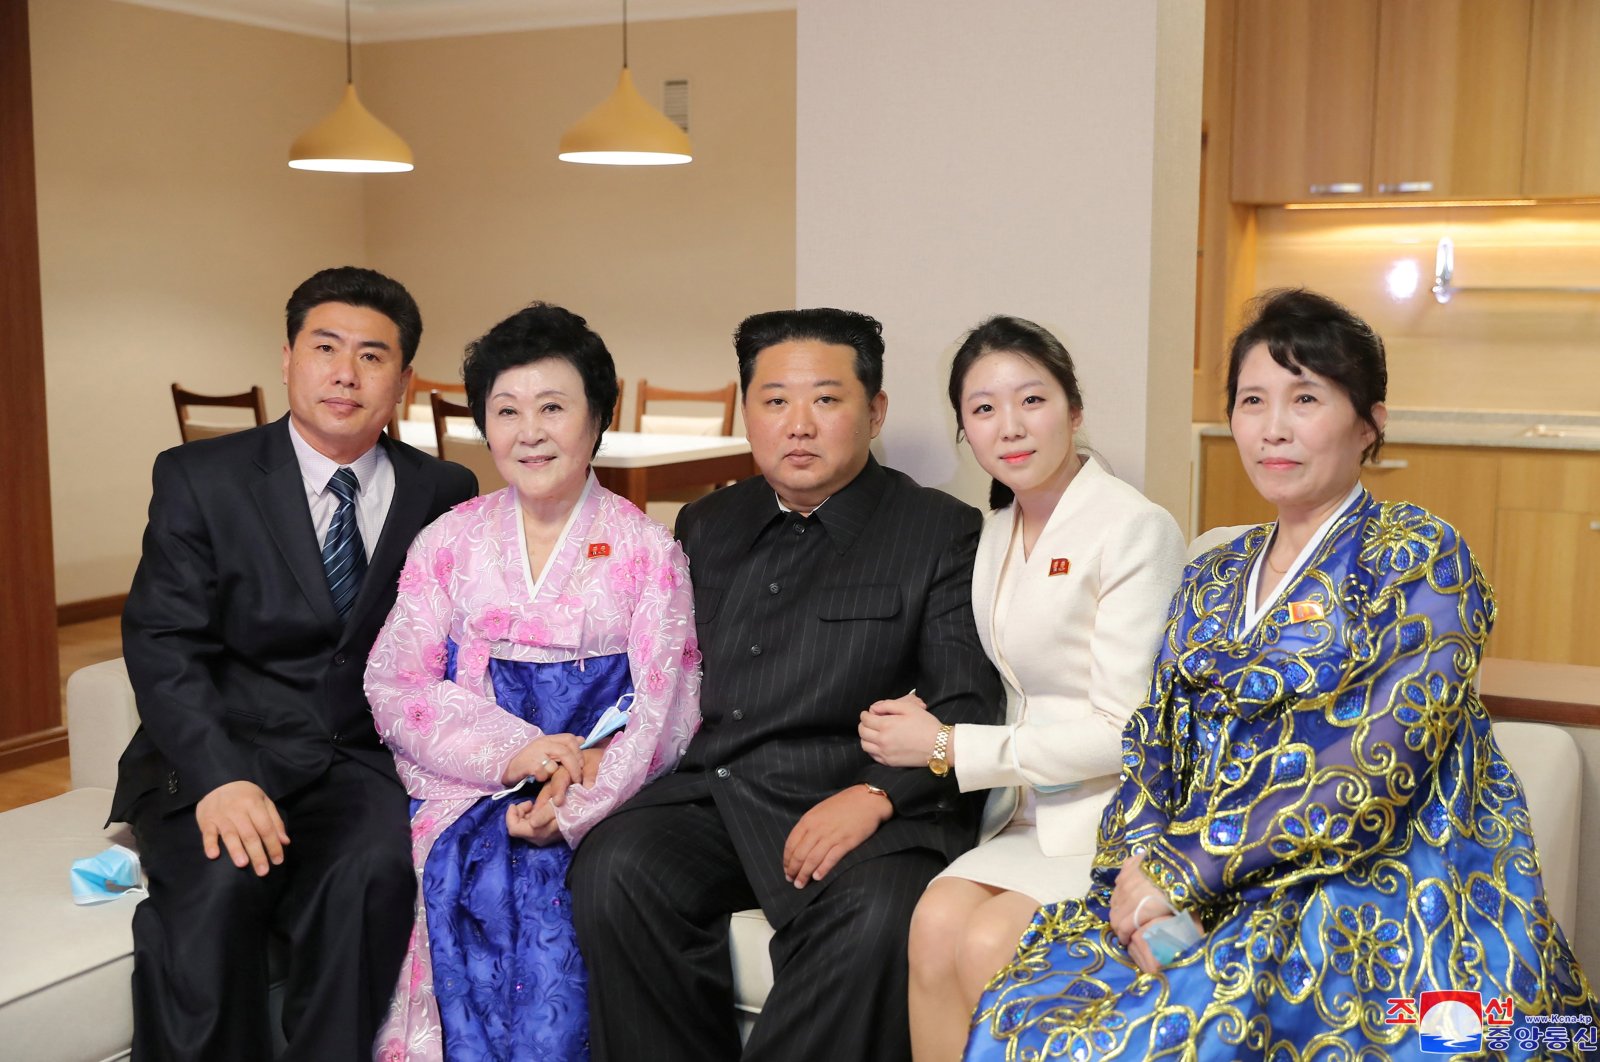 North Korean leader Kim Jong Un poses with North Korean announcer Ri Chun Hi and her family at a house in a terraced residential district on the bank of the Pothong River during the completion ceremony, in Pyongyang, North Korea, April 13, 2022. (Reuters Photo)